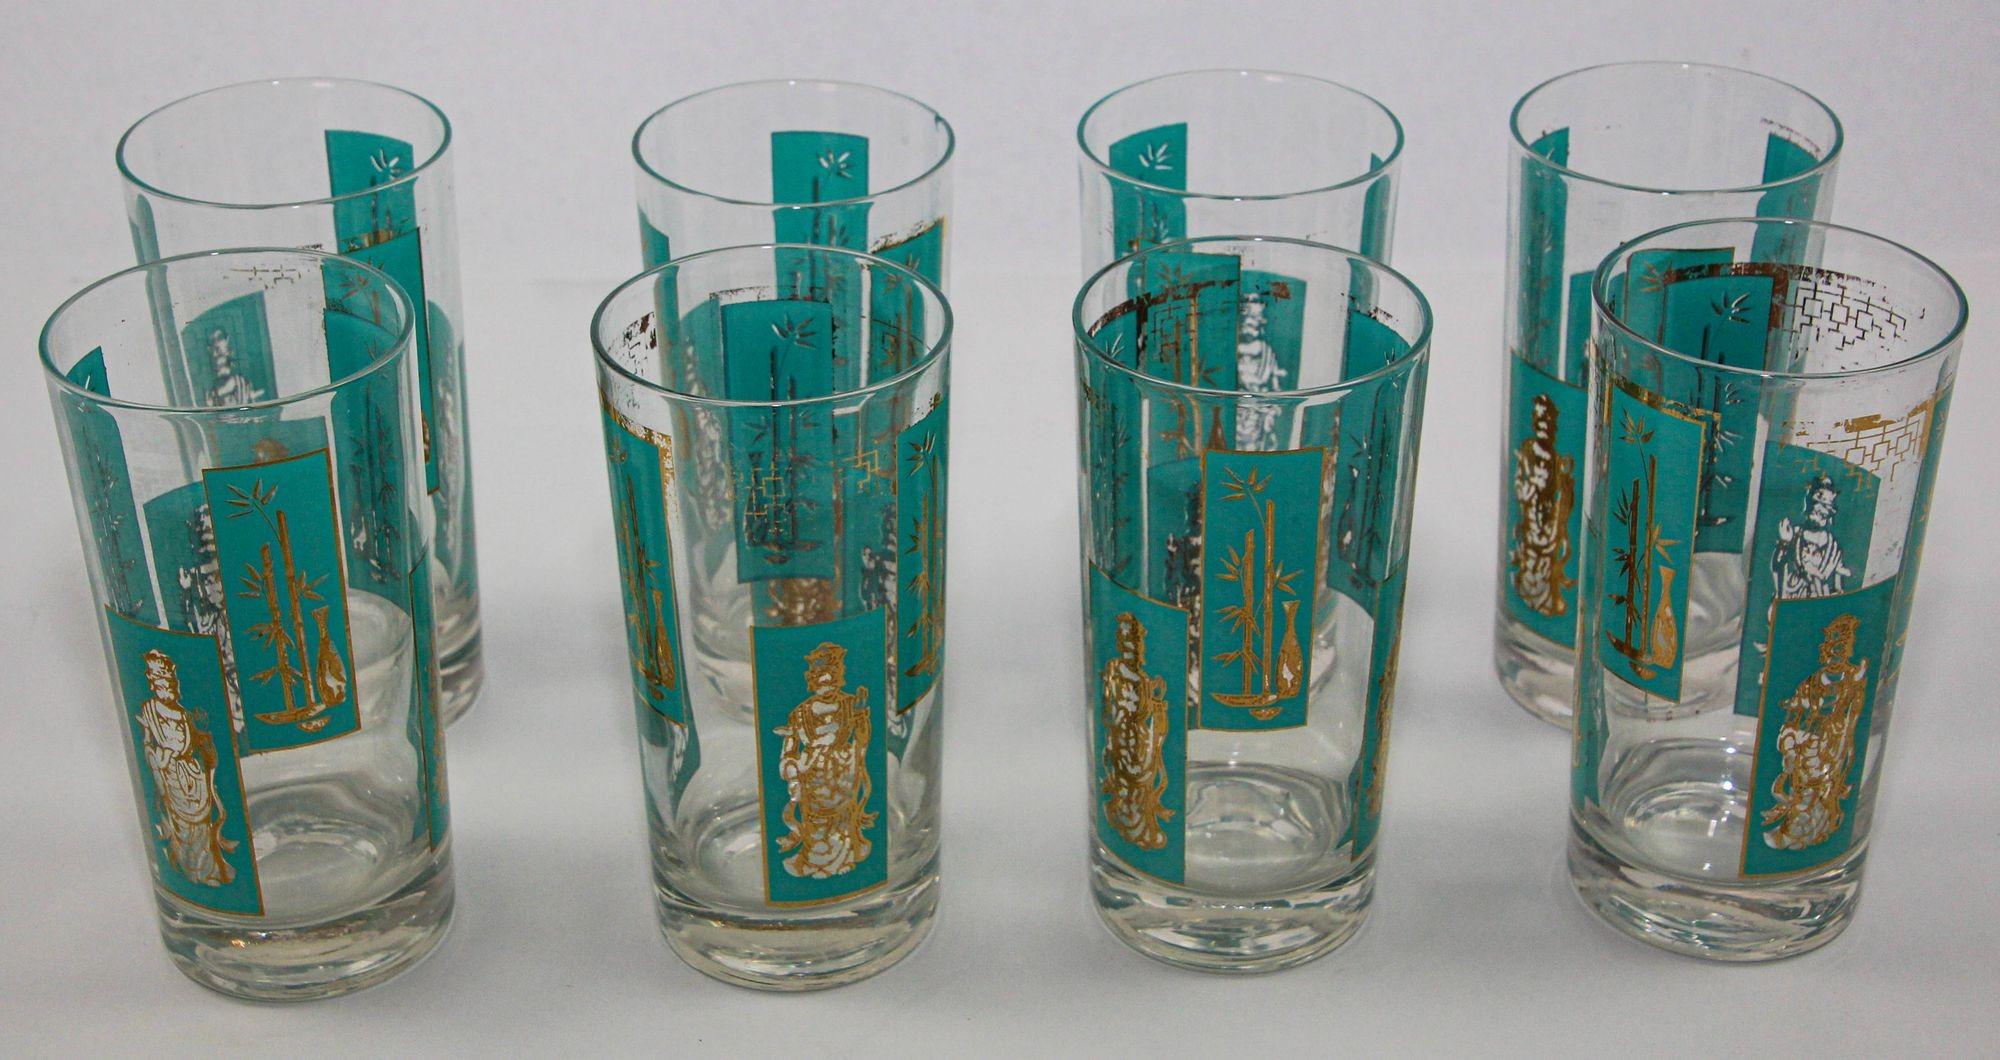 1960s Mid-Century 22-Karat gold and turquoise Shoji Asian Style Highball Glasses attributed to Georges Briard.
Mid-Century 22-Karat gold and blue Chinoiserie style highball tumbler glasses Set of 8.
This gorgeous in typical mid-century design